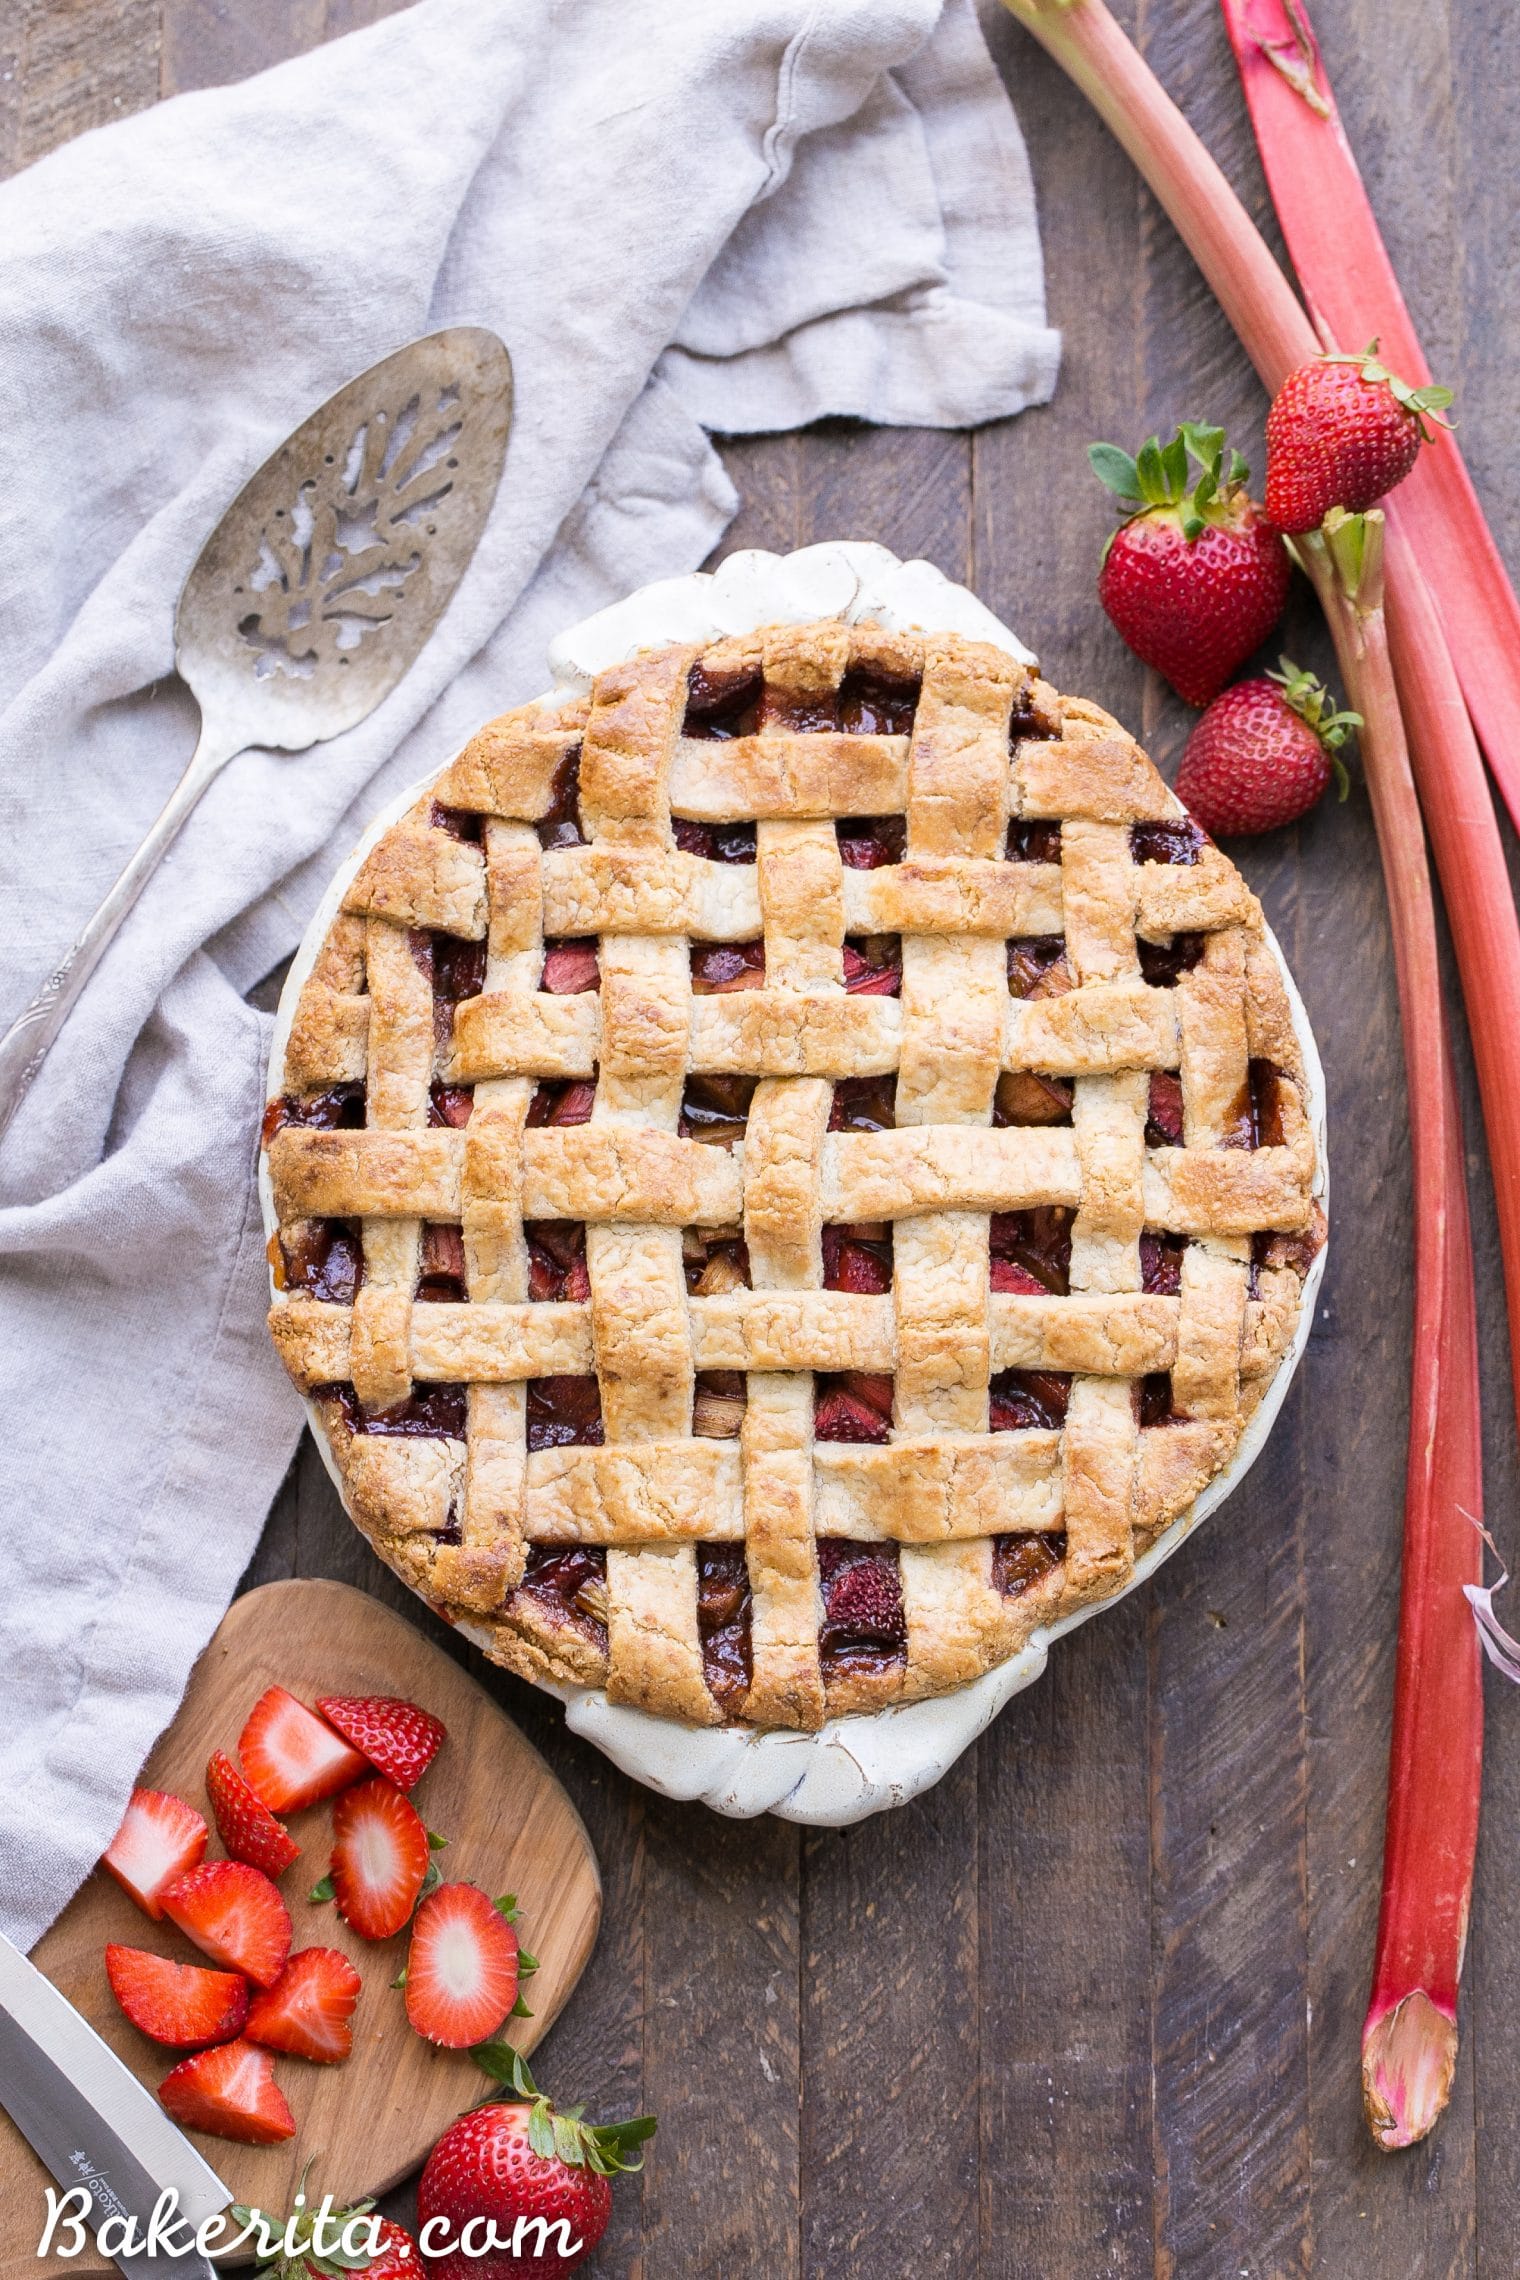 This Paleo Strawberry Rhubarb Pie is bursting with fresh strawberries and rhubarb, creating a delectable tart + sweet pie! The crisp and flaky gluten-free + grain-free crust is the perfect vessel for the lightly spiced fruit filling. 